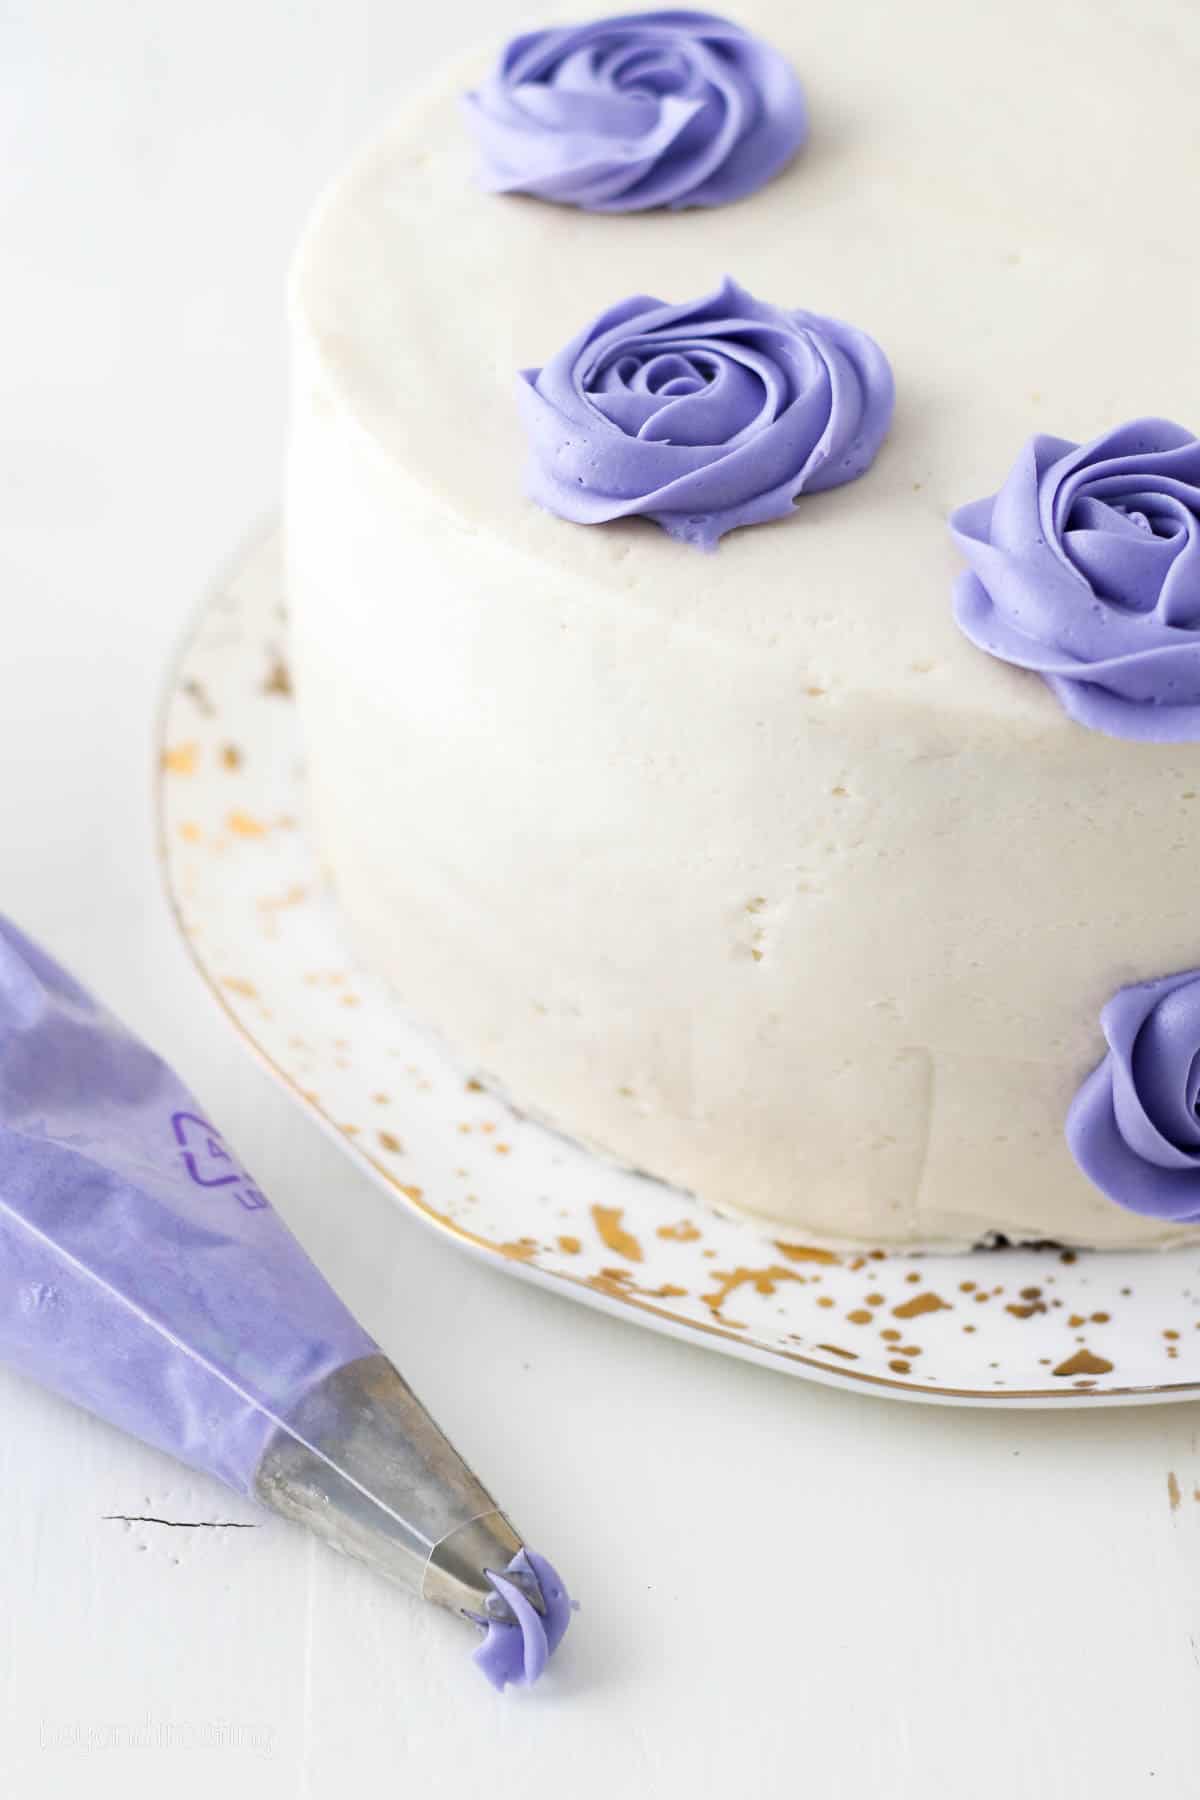 A piping bag filled with purple buttercream next to a cake frosted white with purple buttercream roses.